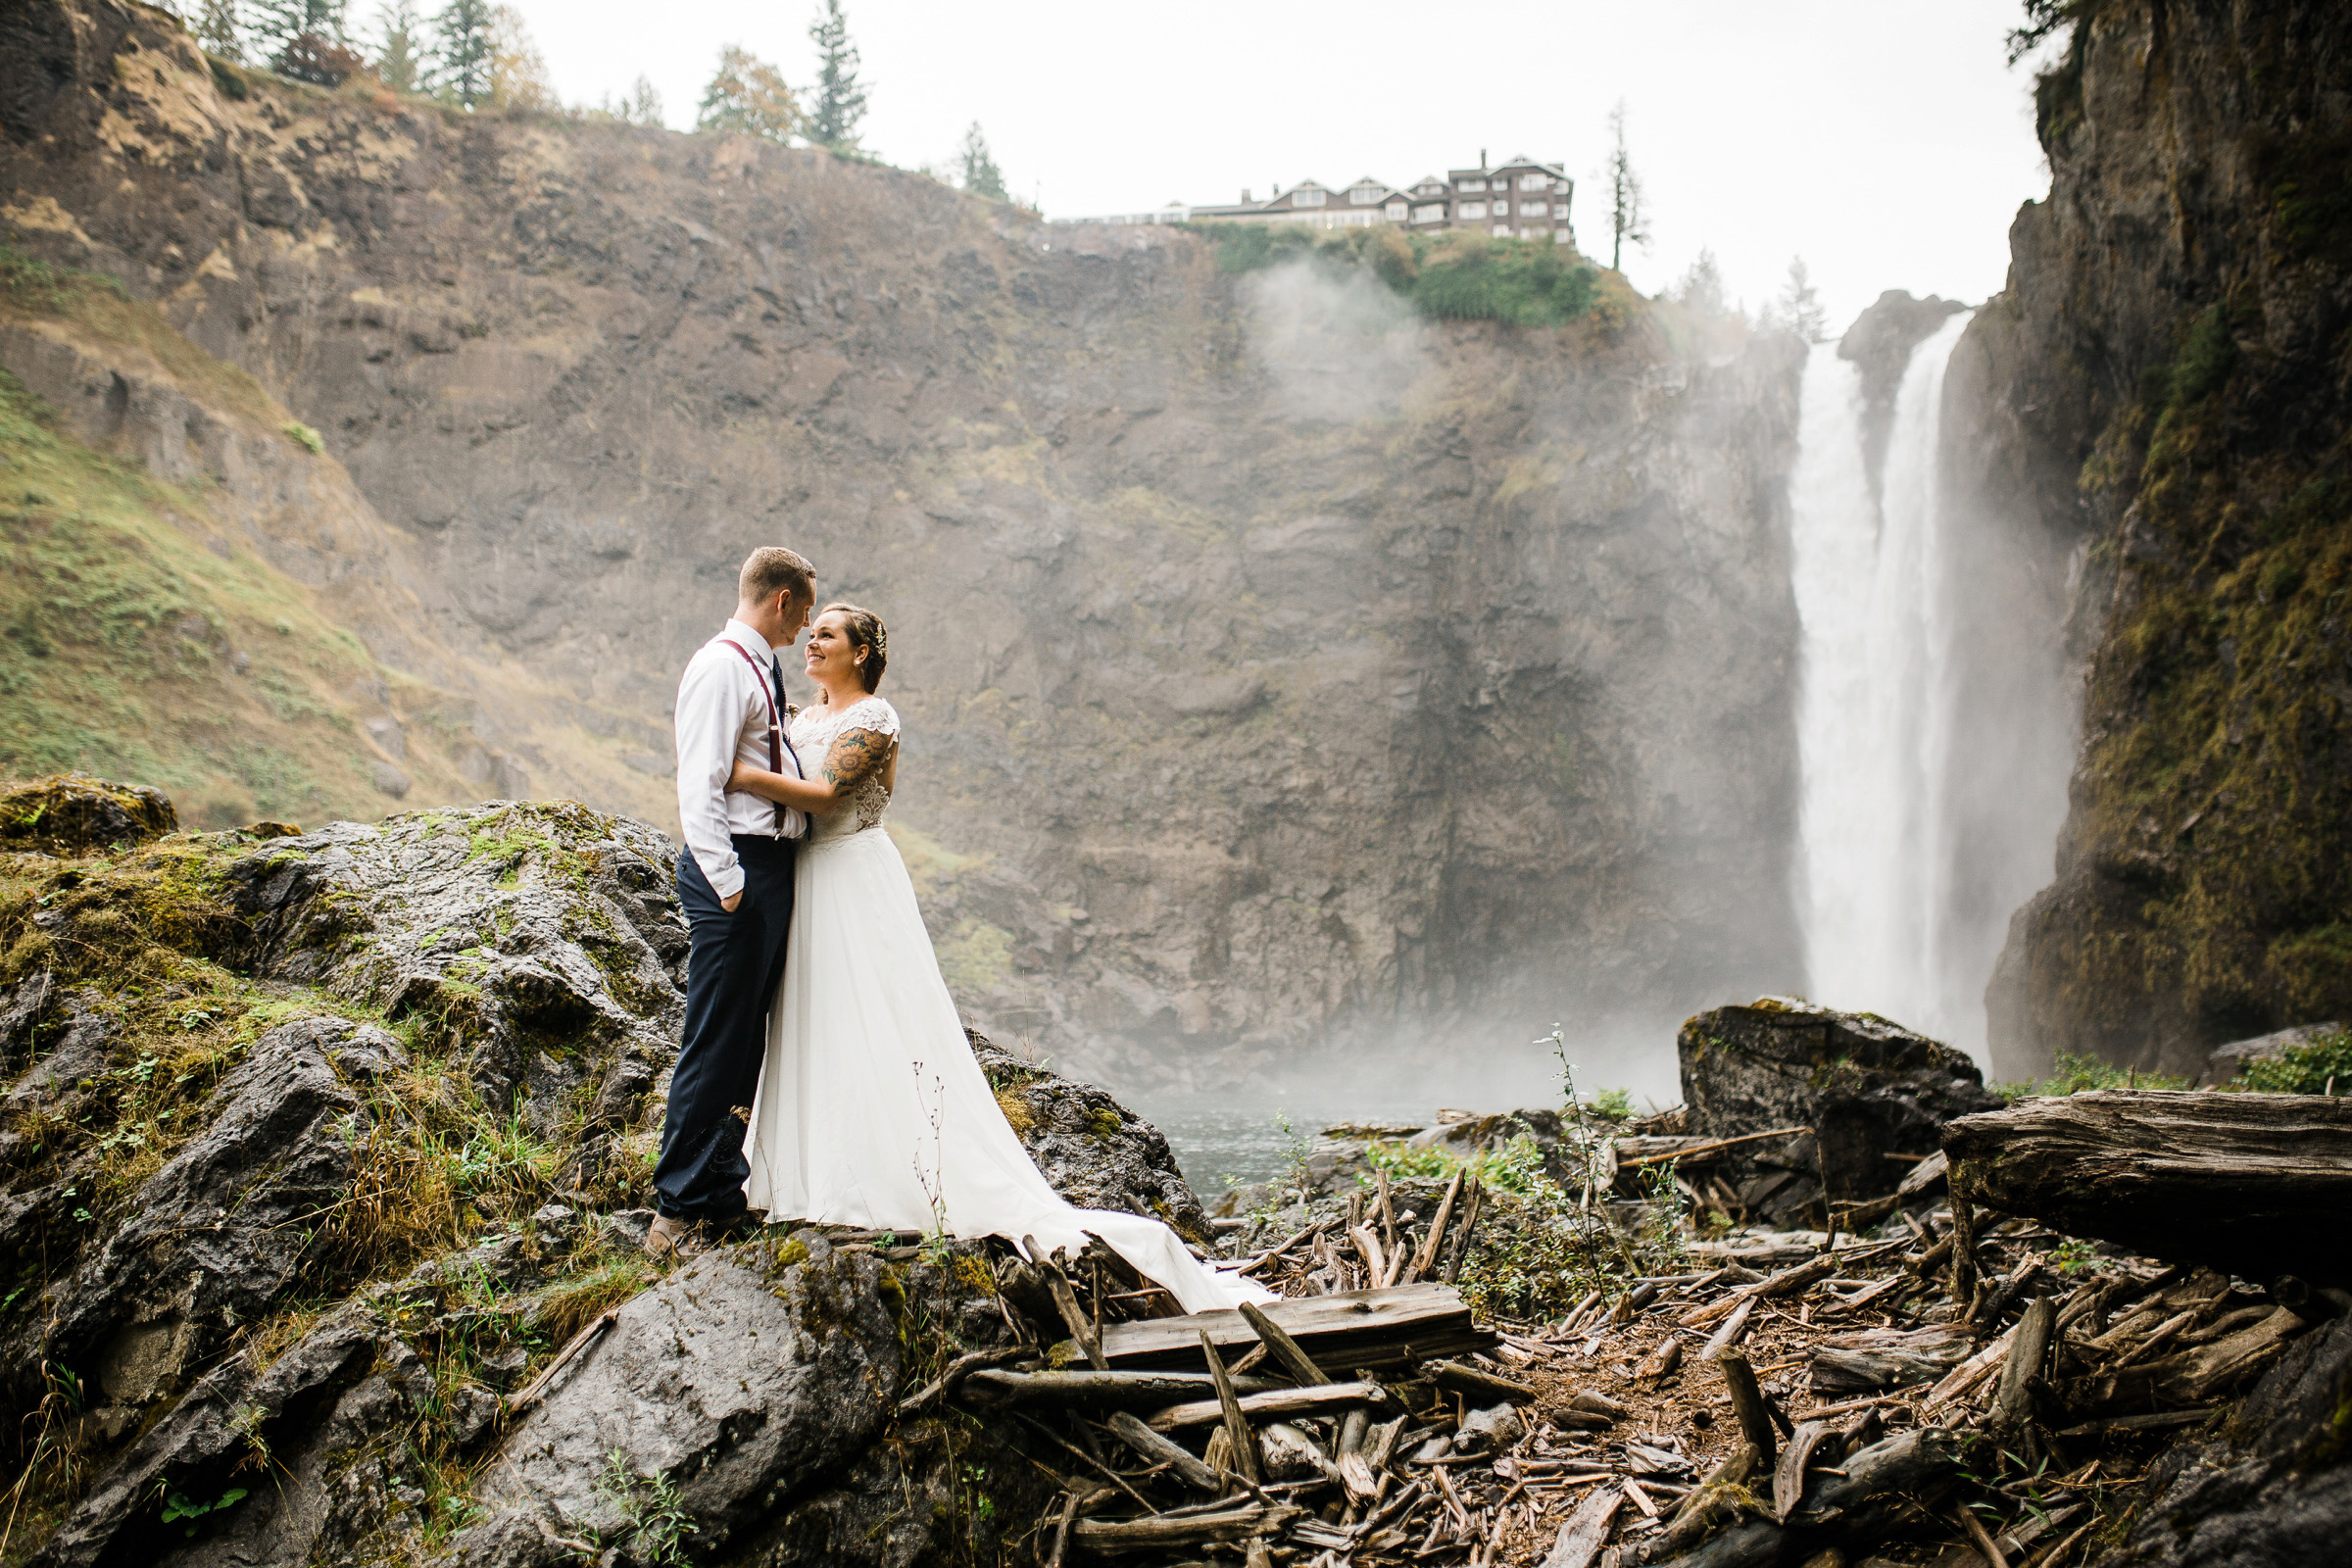 15-Seattle-Elopement-Photographer-Snoqualmie-Pass-Water-Falls-Hiking-Adventure-Wedding-Photography